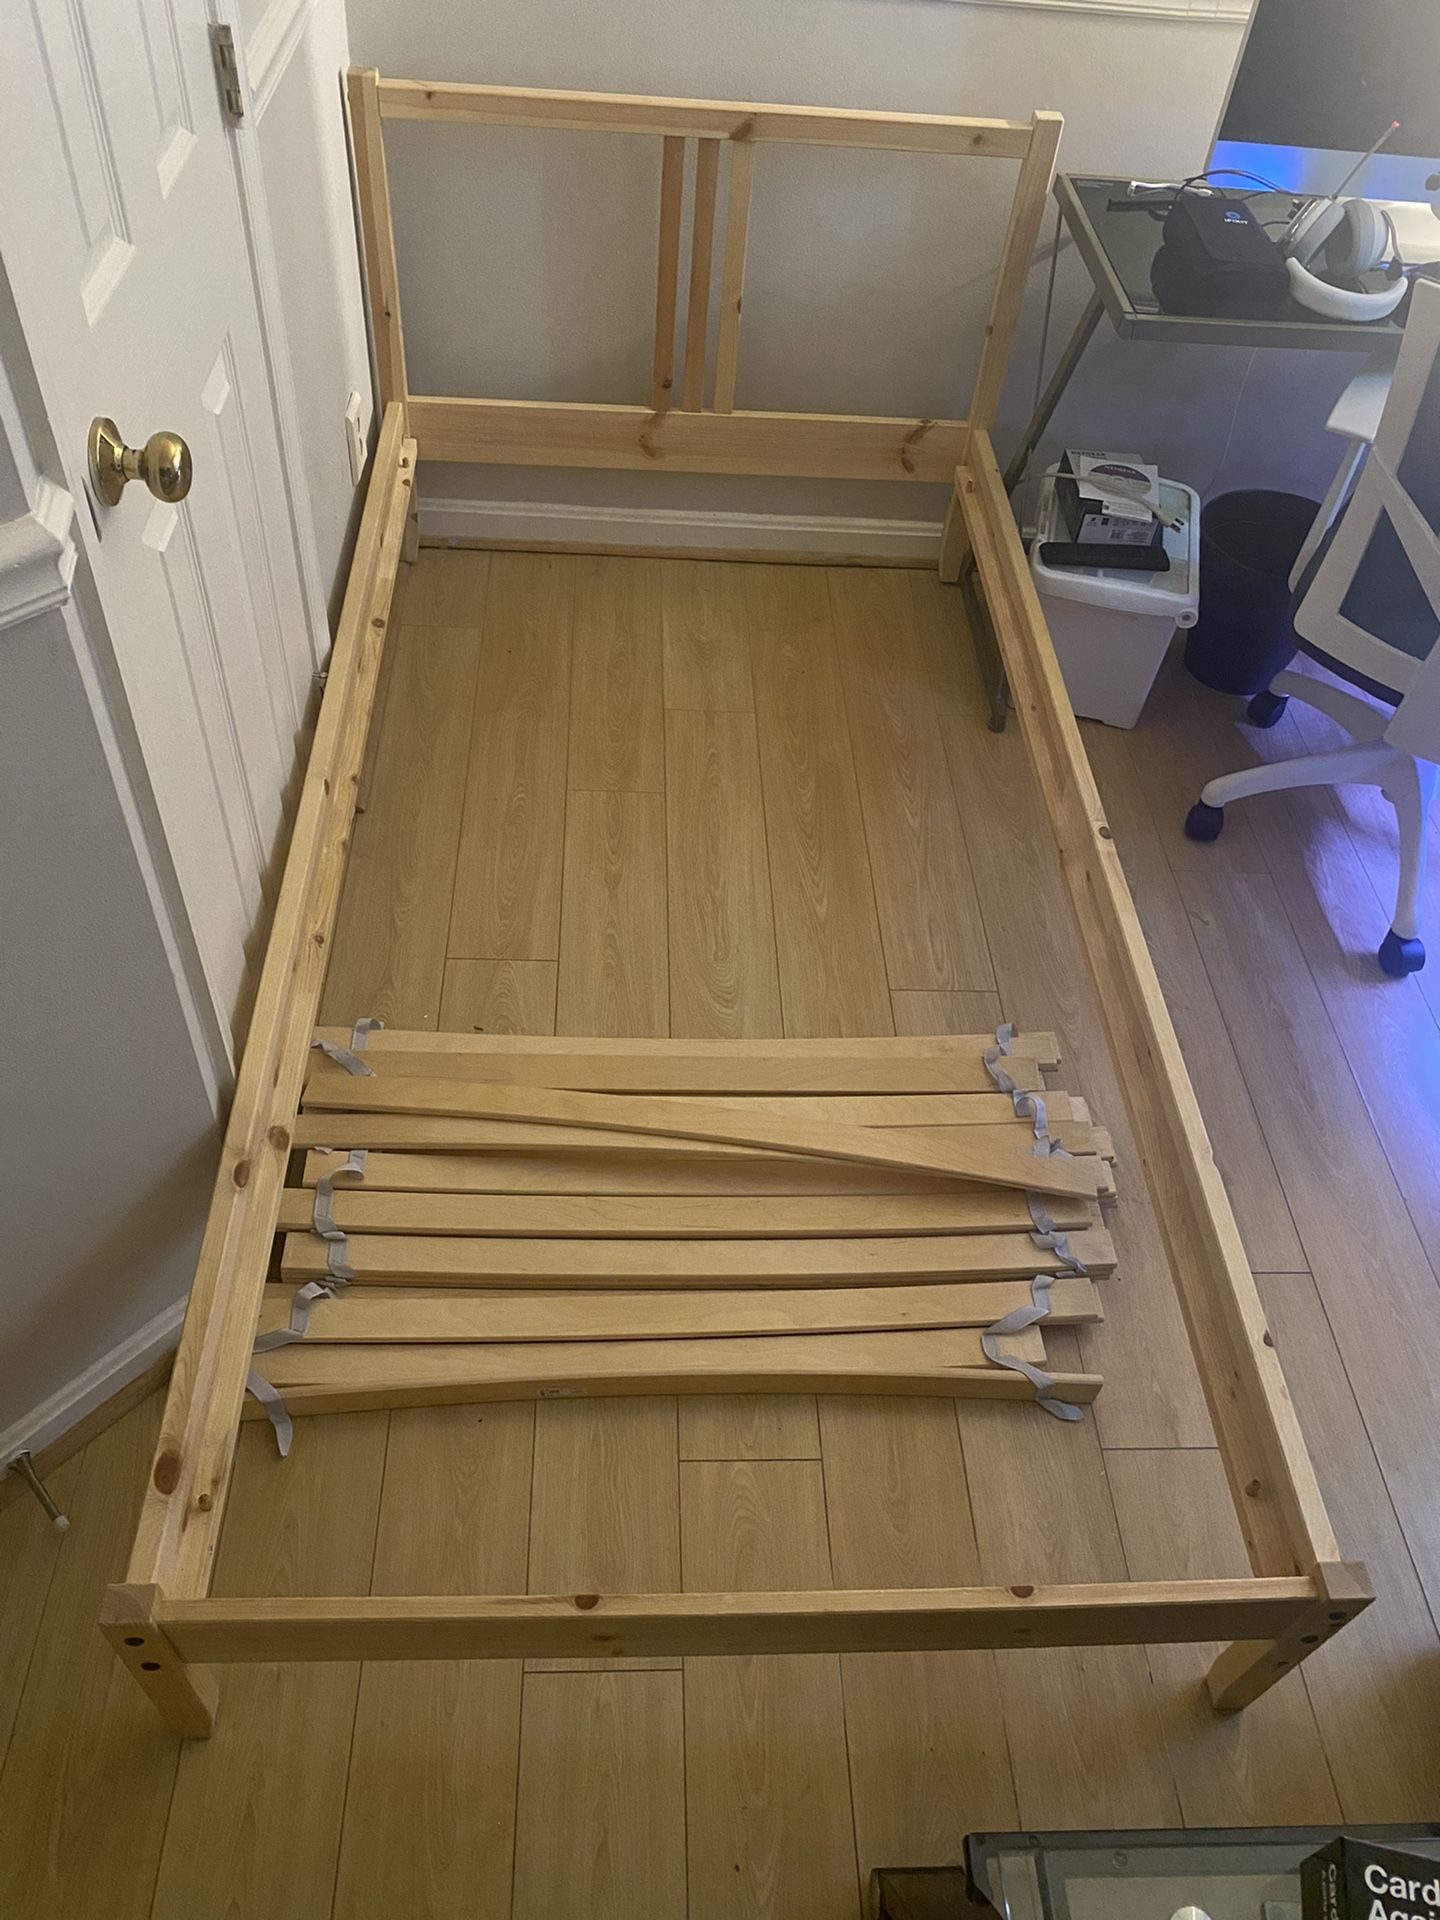 Twin size be frame with bed slats